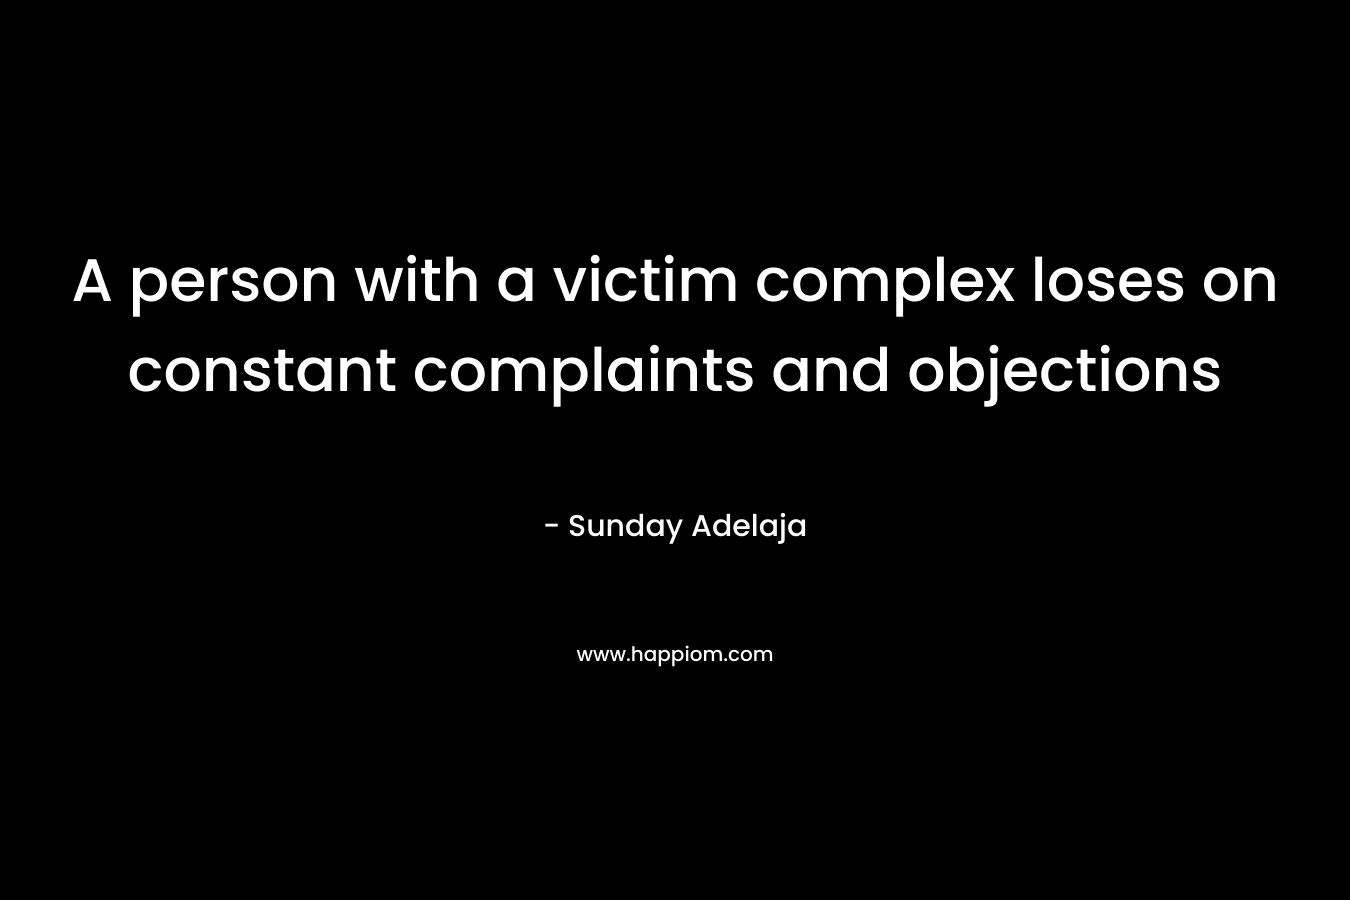 A person with a victim complex loses on constant complaints and objections